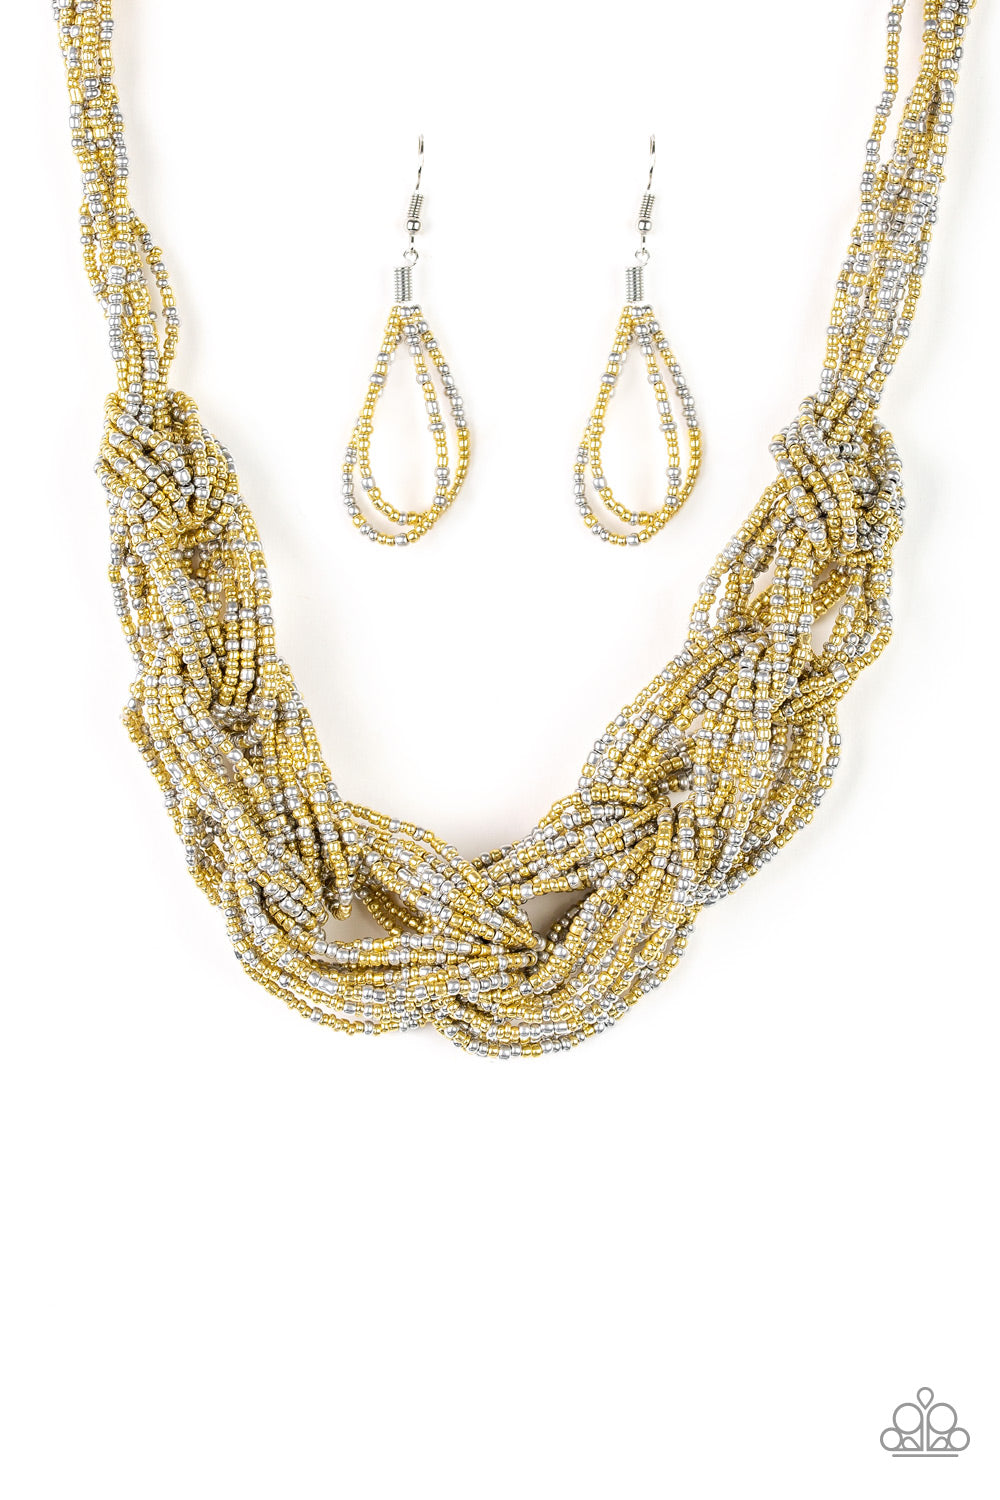 Paparazzi Accessories - City Catwalk #N543- Gold Necklace